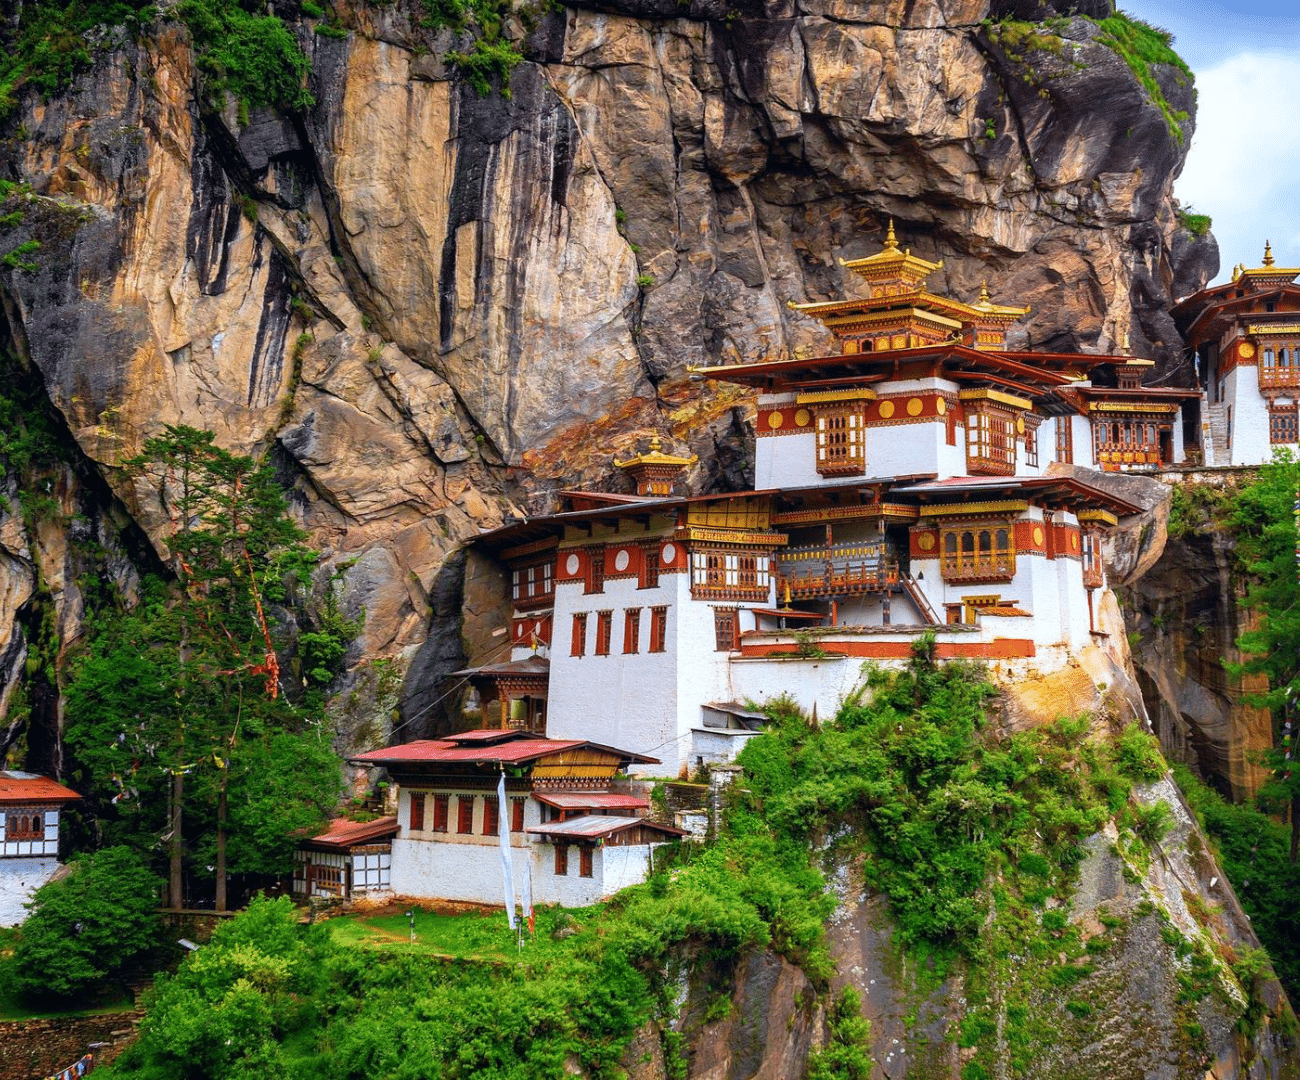 Paro included in bhutan tour package